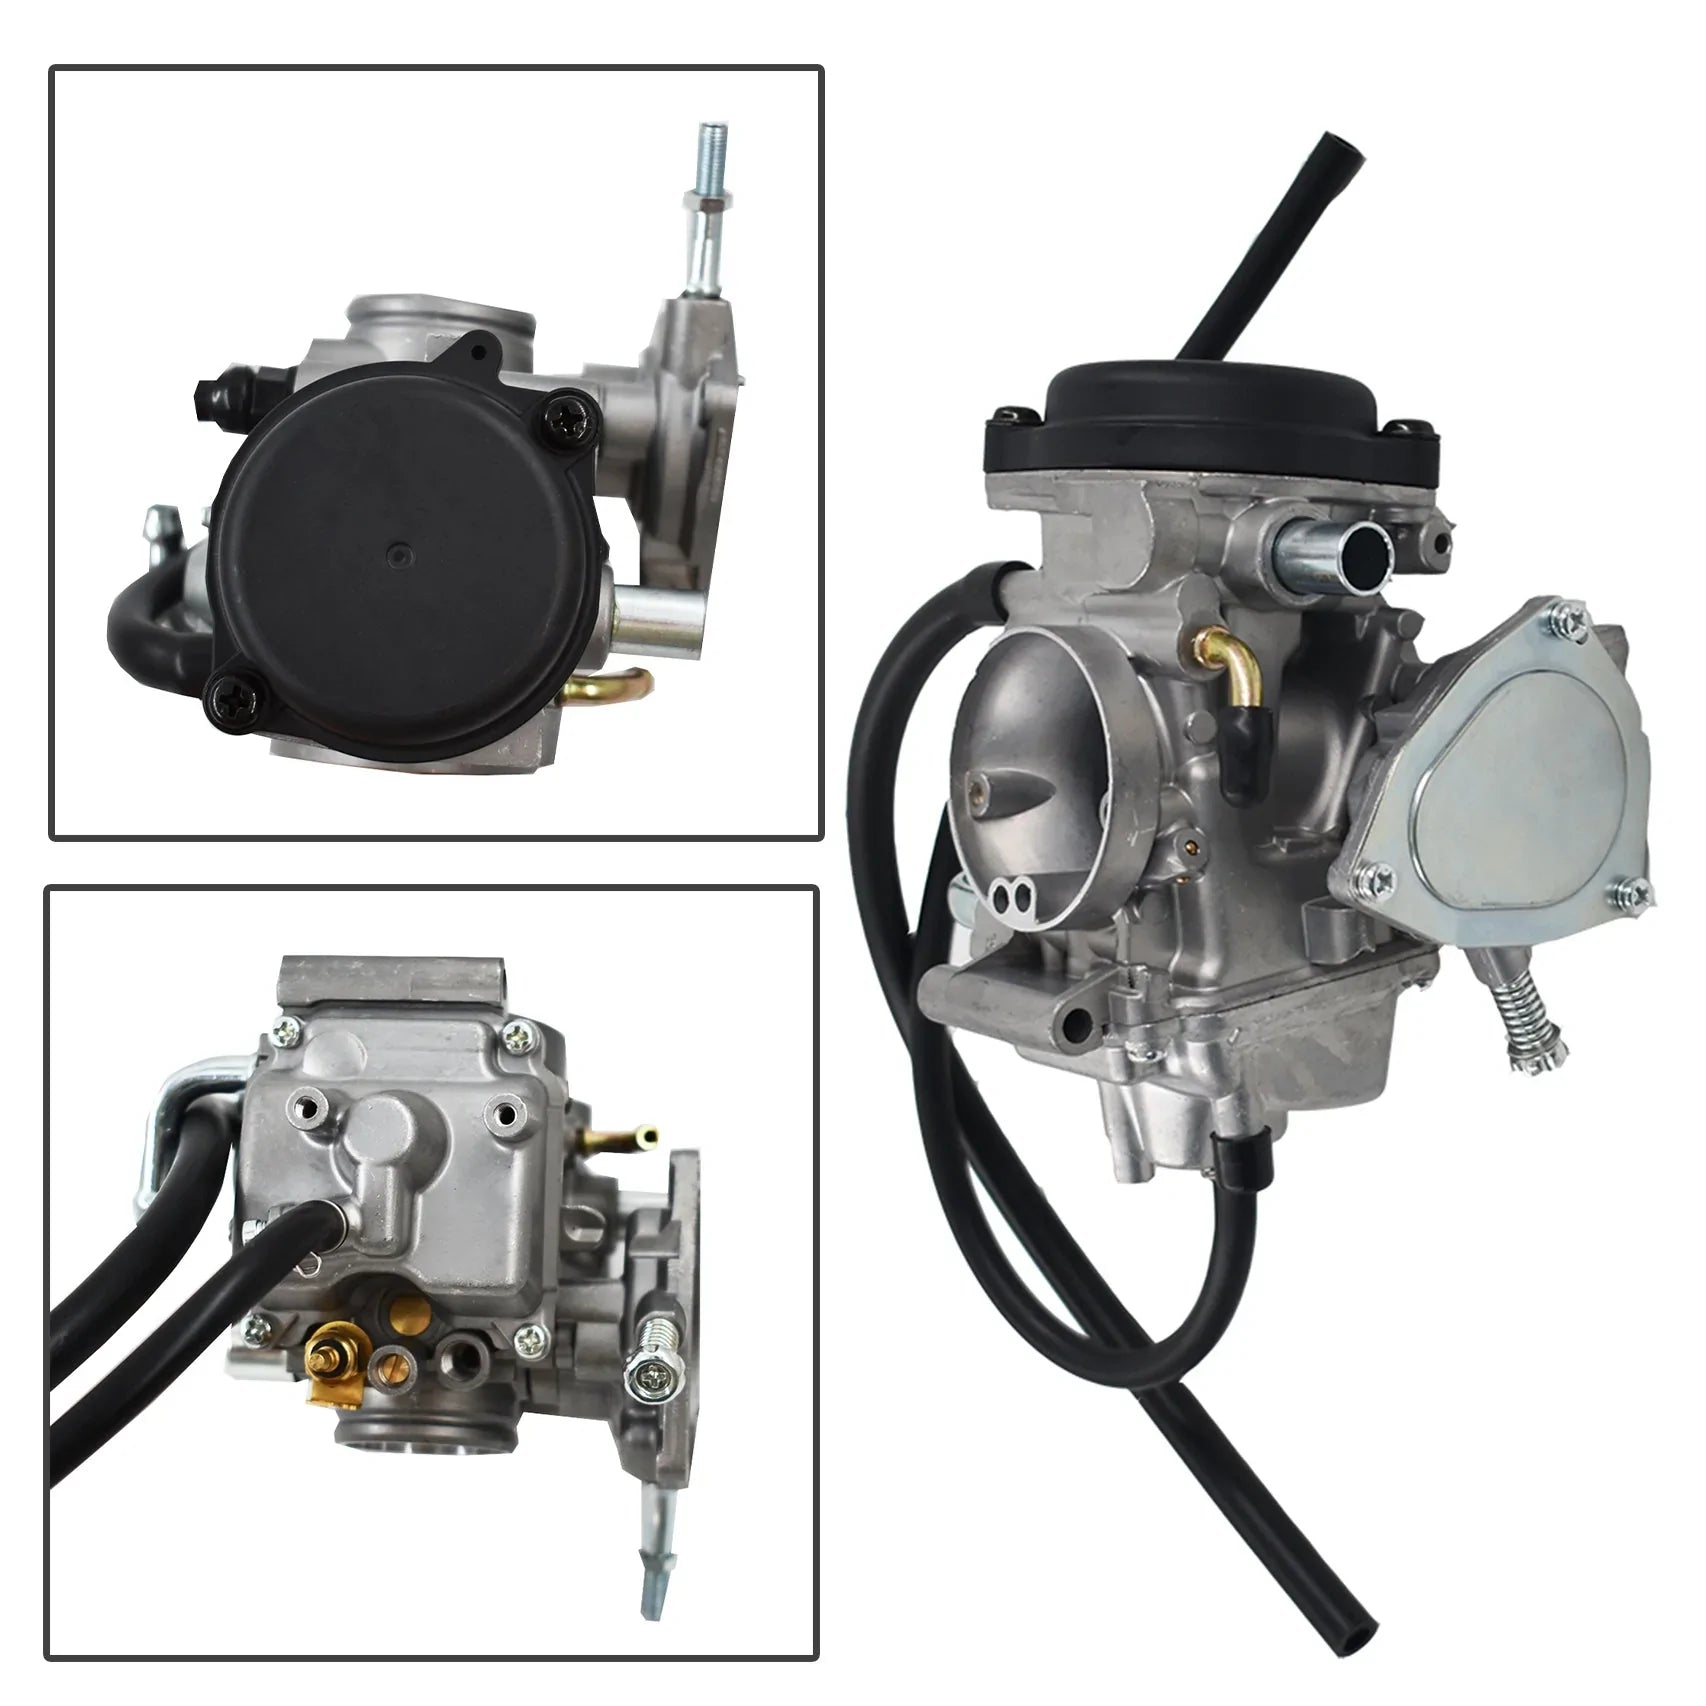 labwork Carburetor for Bombardier Can-Am Outlander Max 400 4x4 2004 2005 2006 2007 2008 Carb LAB WORK MOTO